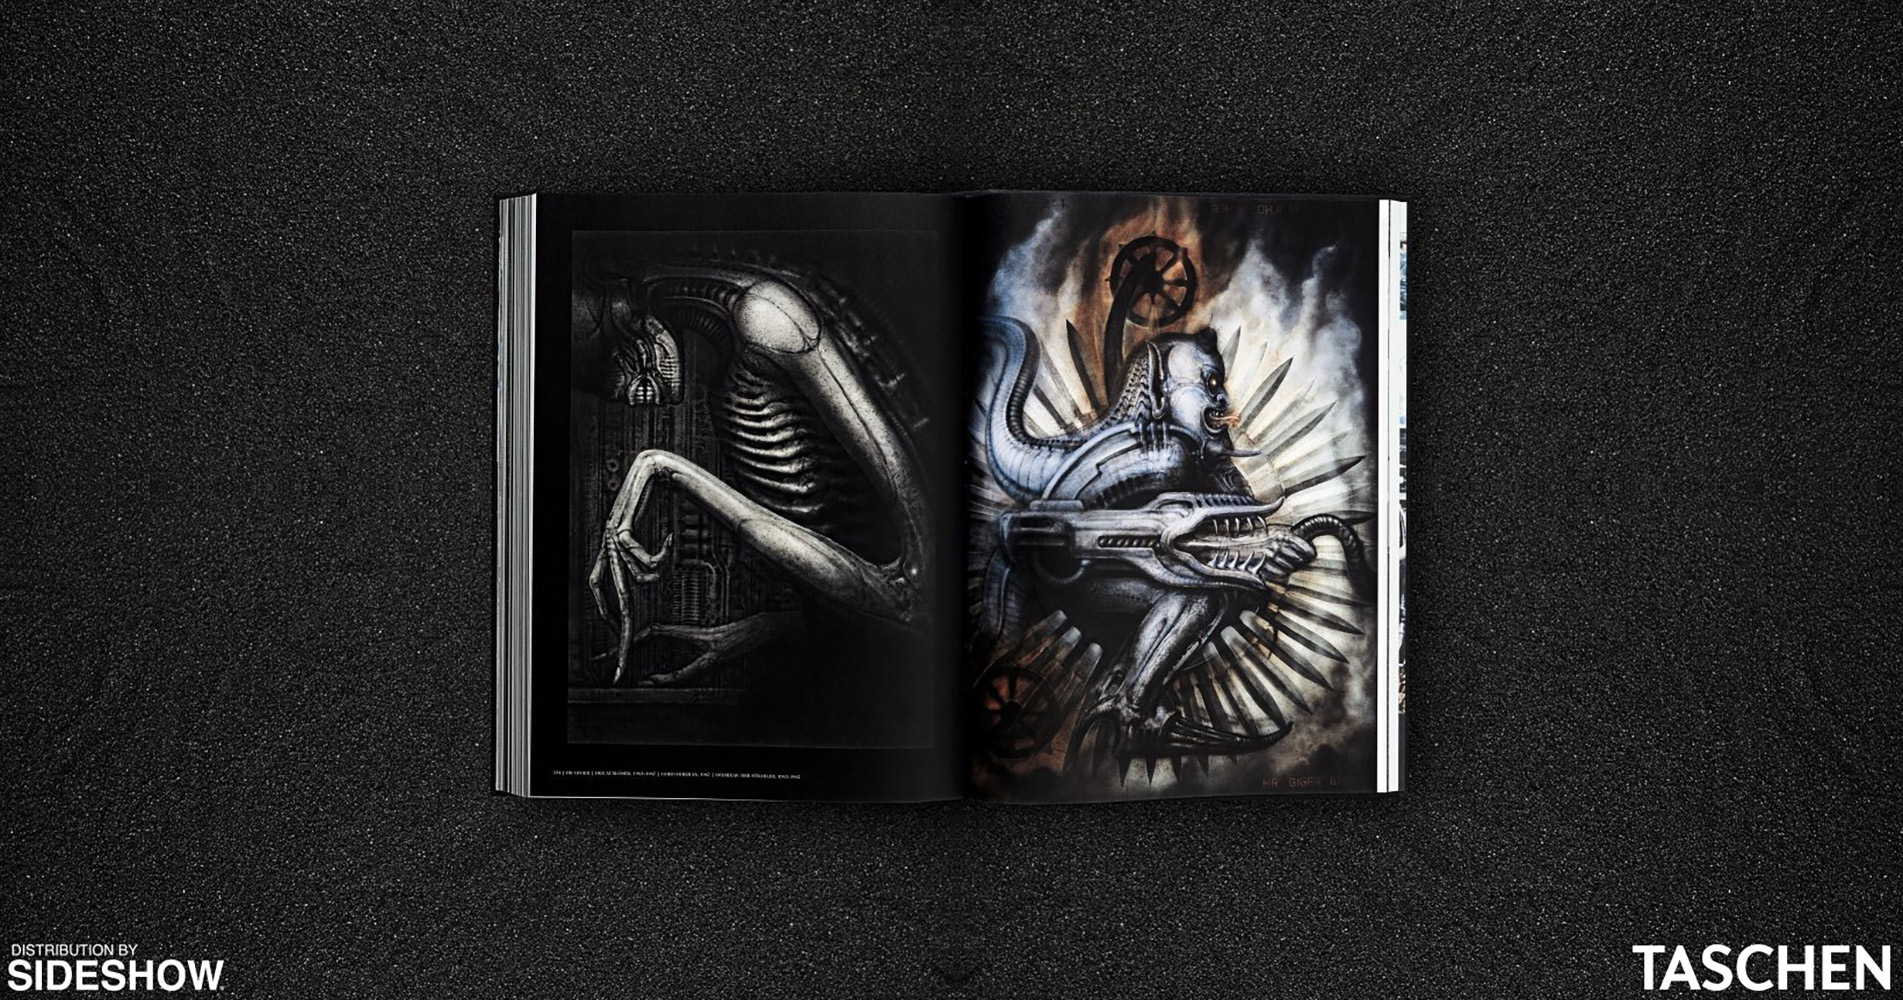 H.R. Giger Collector's Edition